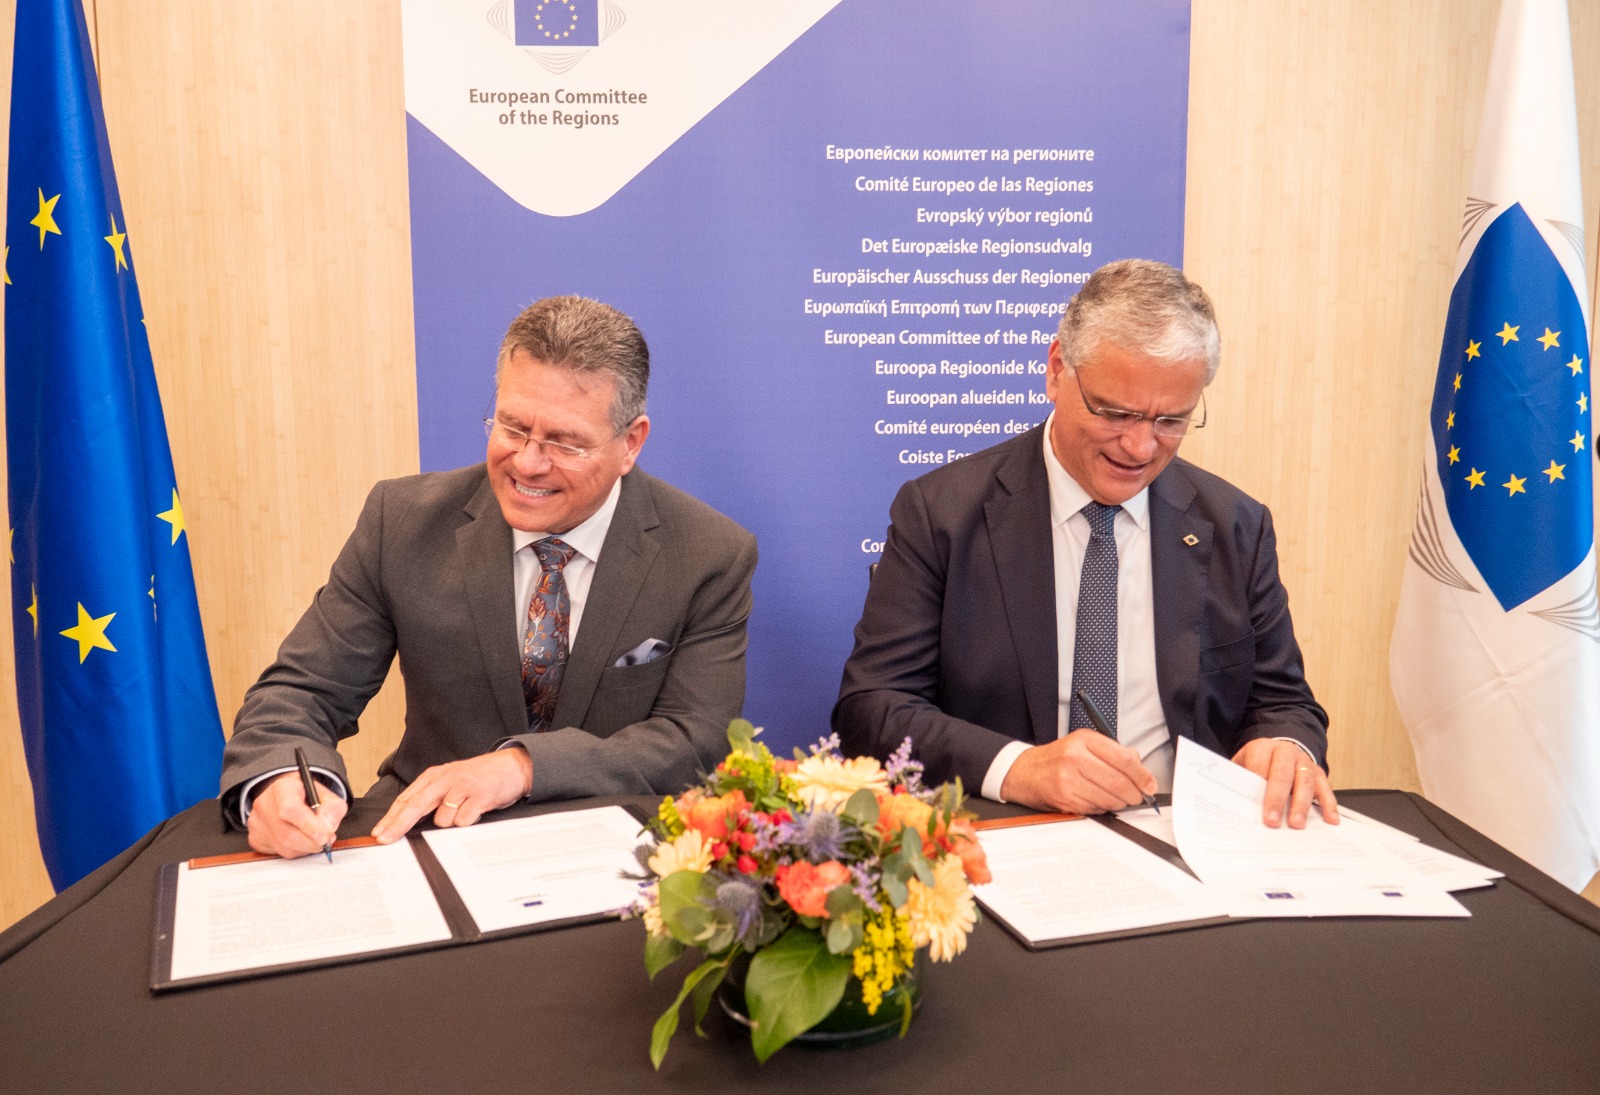 The European Committee of the Regions and the European Commission strengthen cooperation